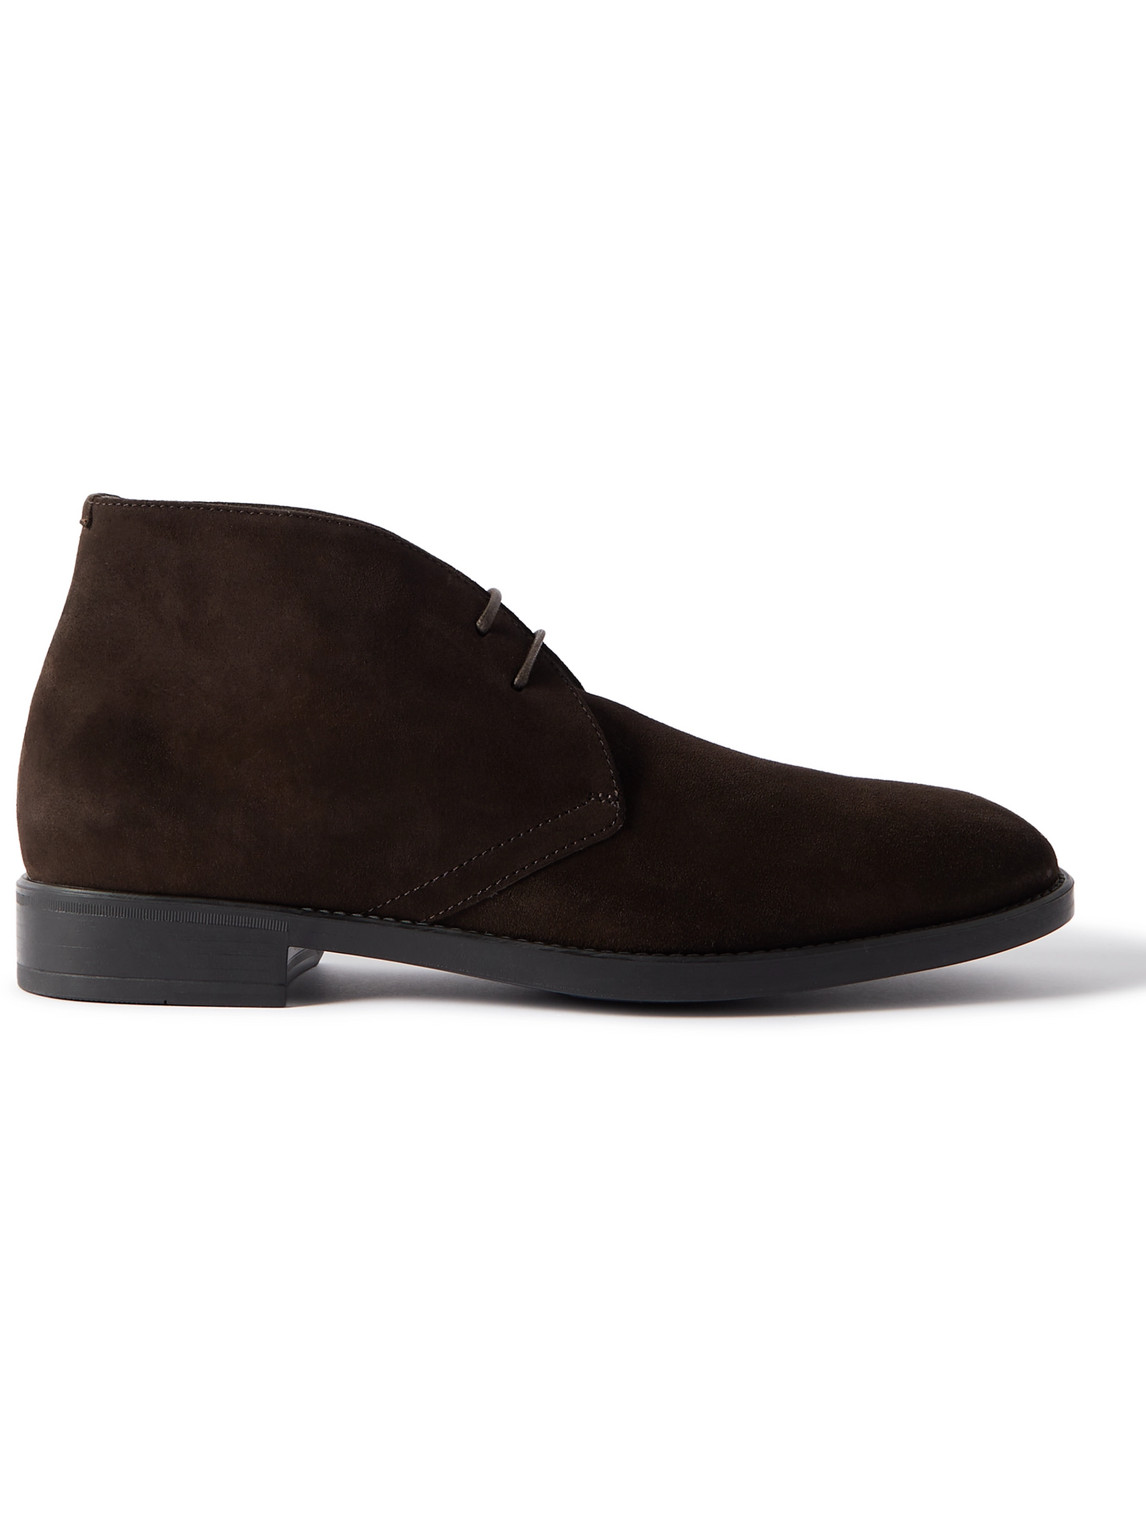 TOM FORD dressing gownRT SUEDE CHUKKA BOOTS